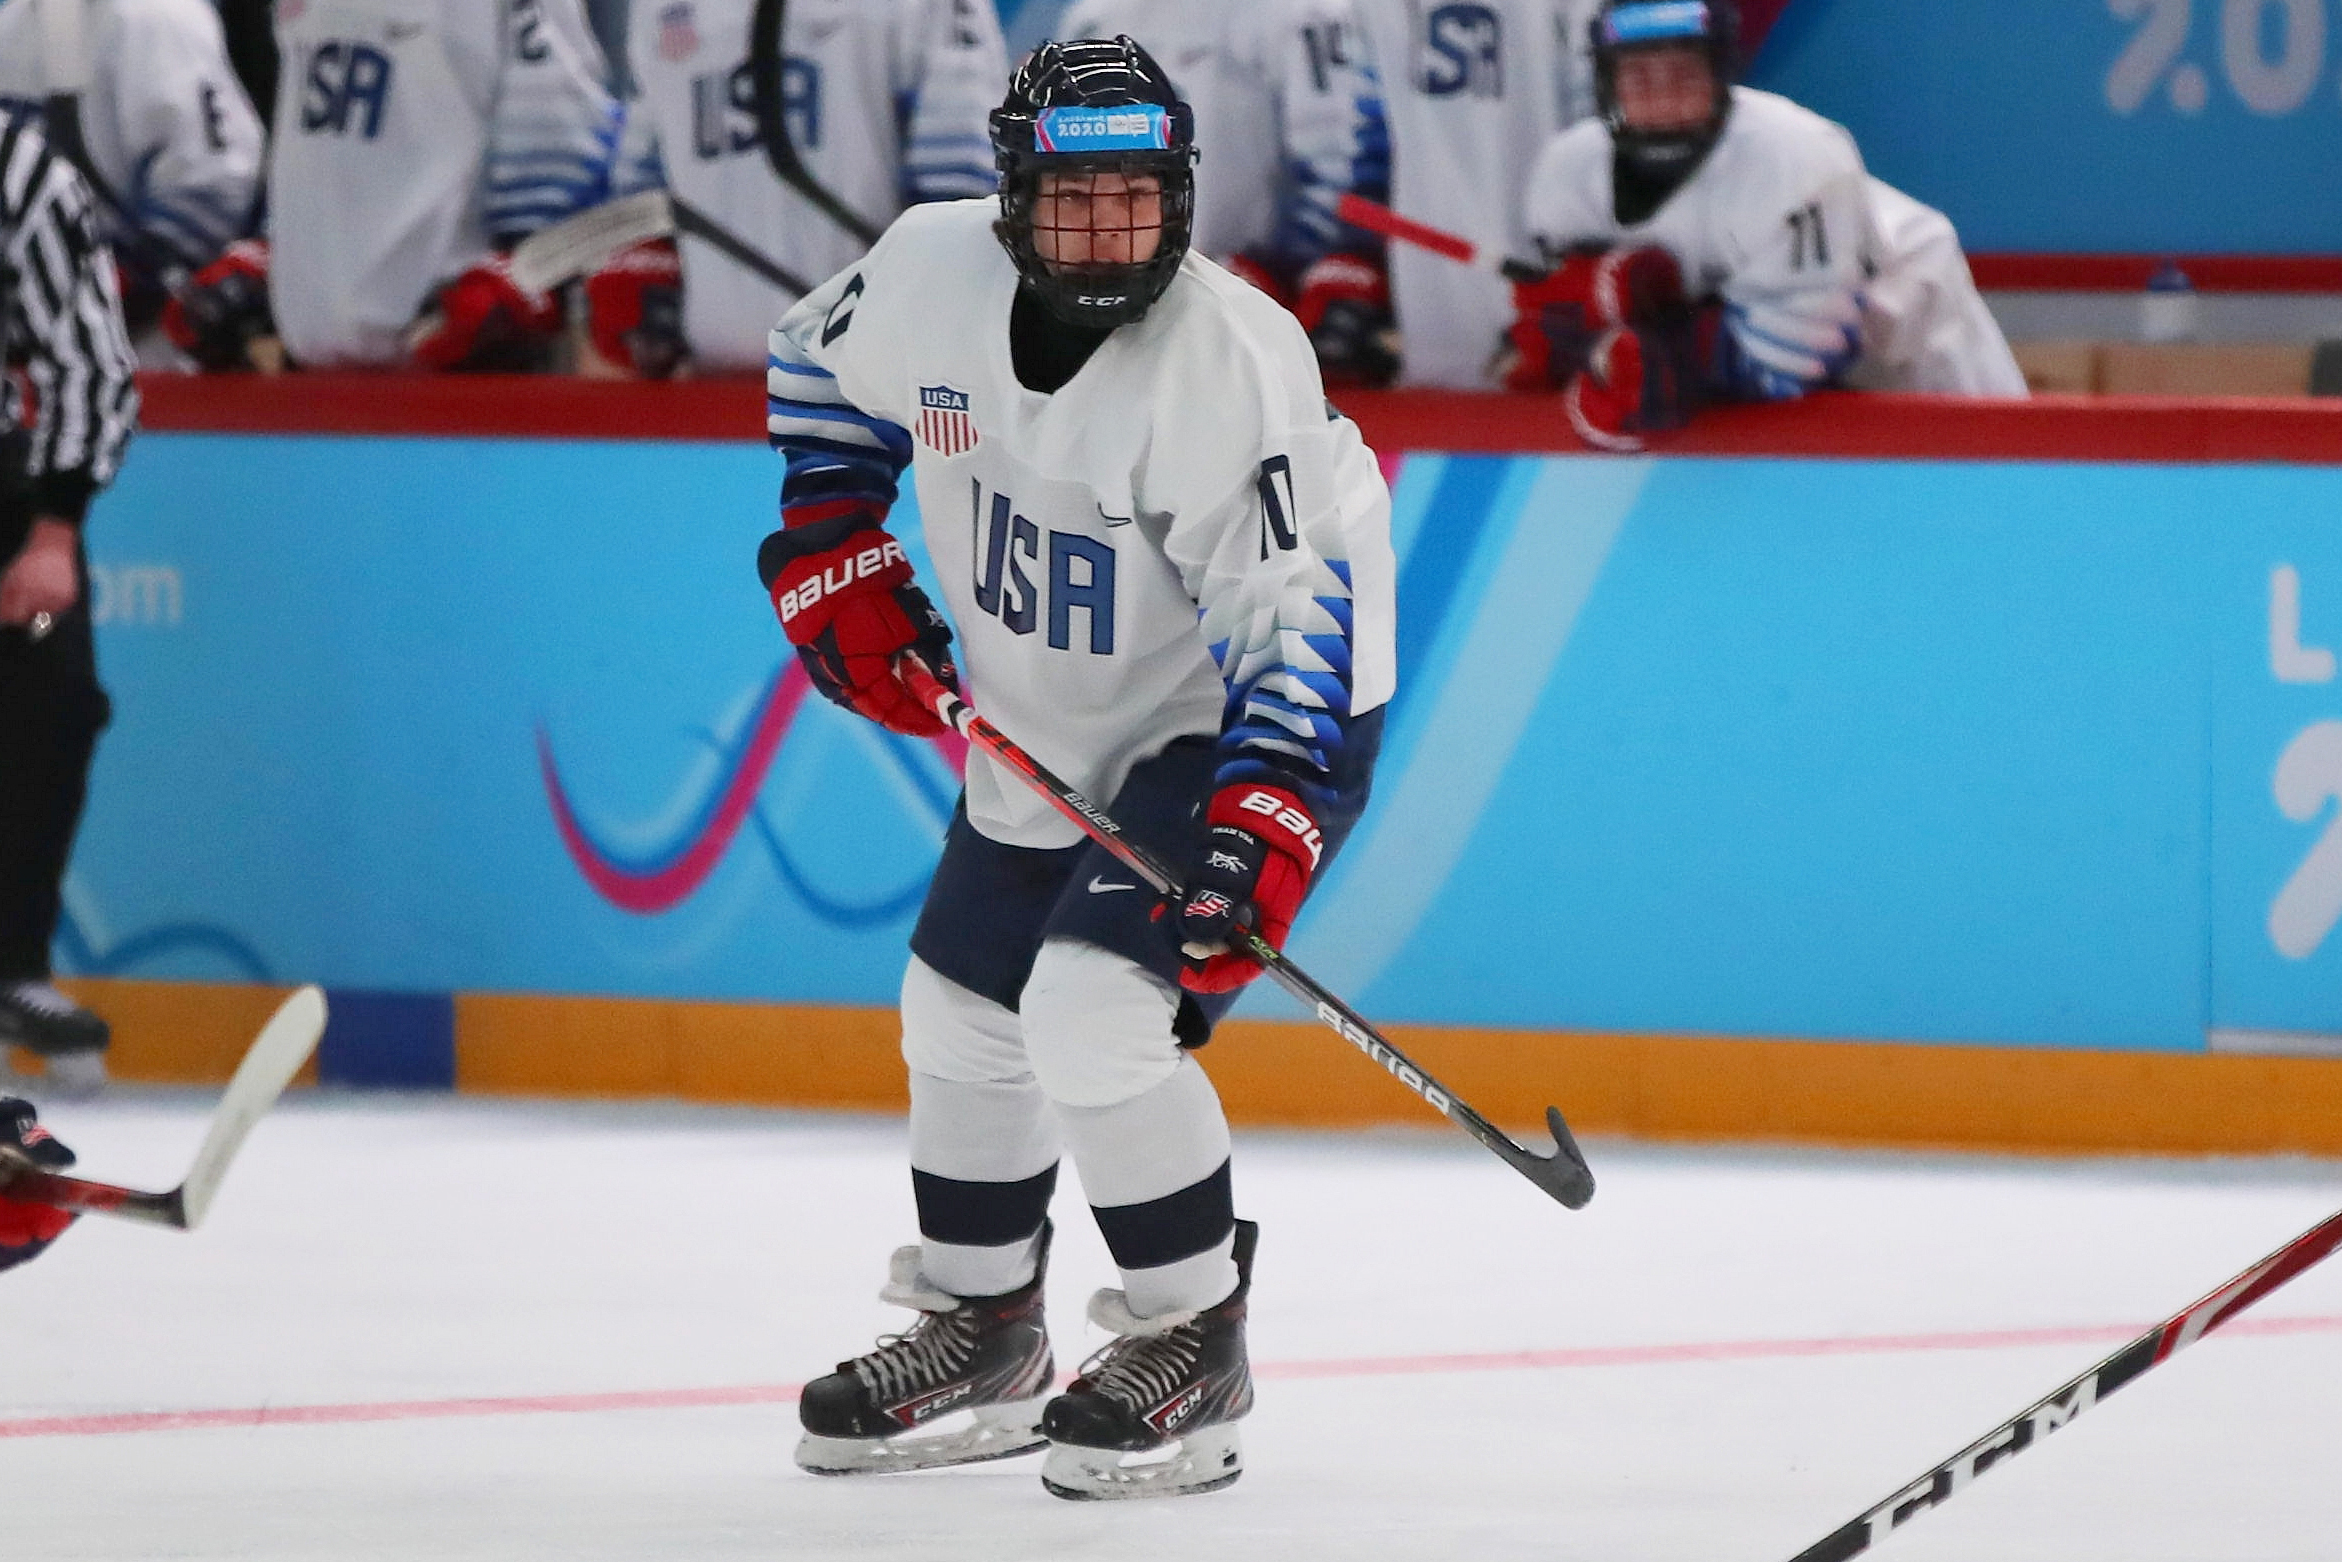 Could the Capitals pursue Isaac Howard in the 2022 NHL Draft?